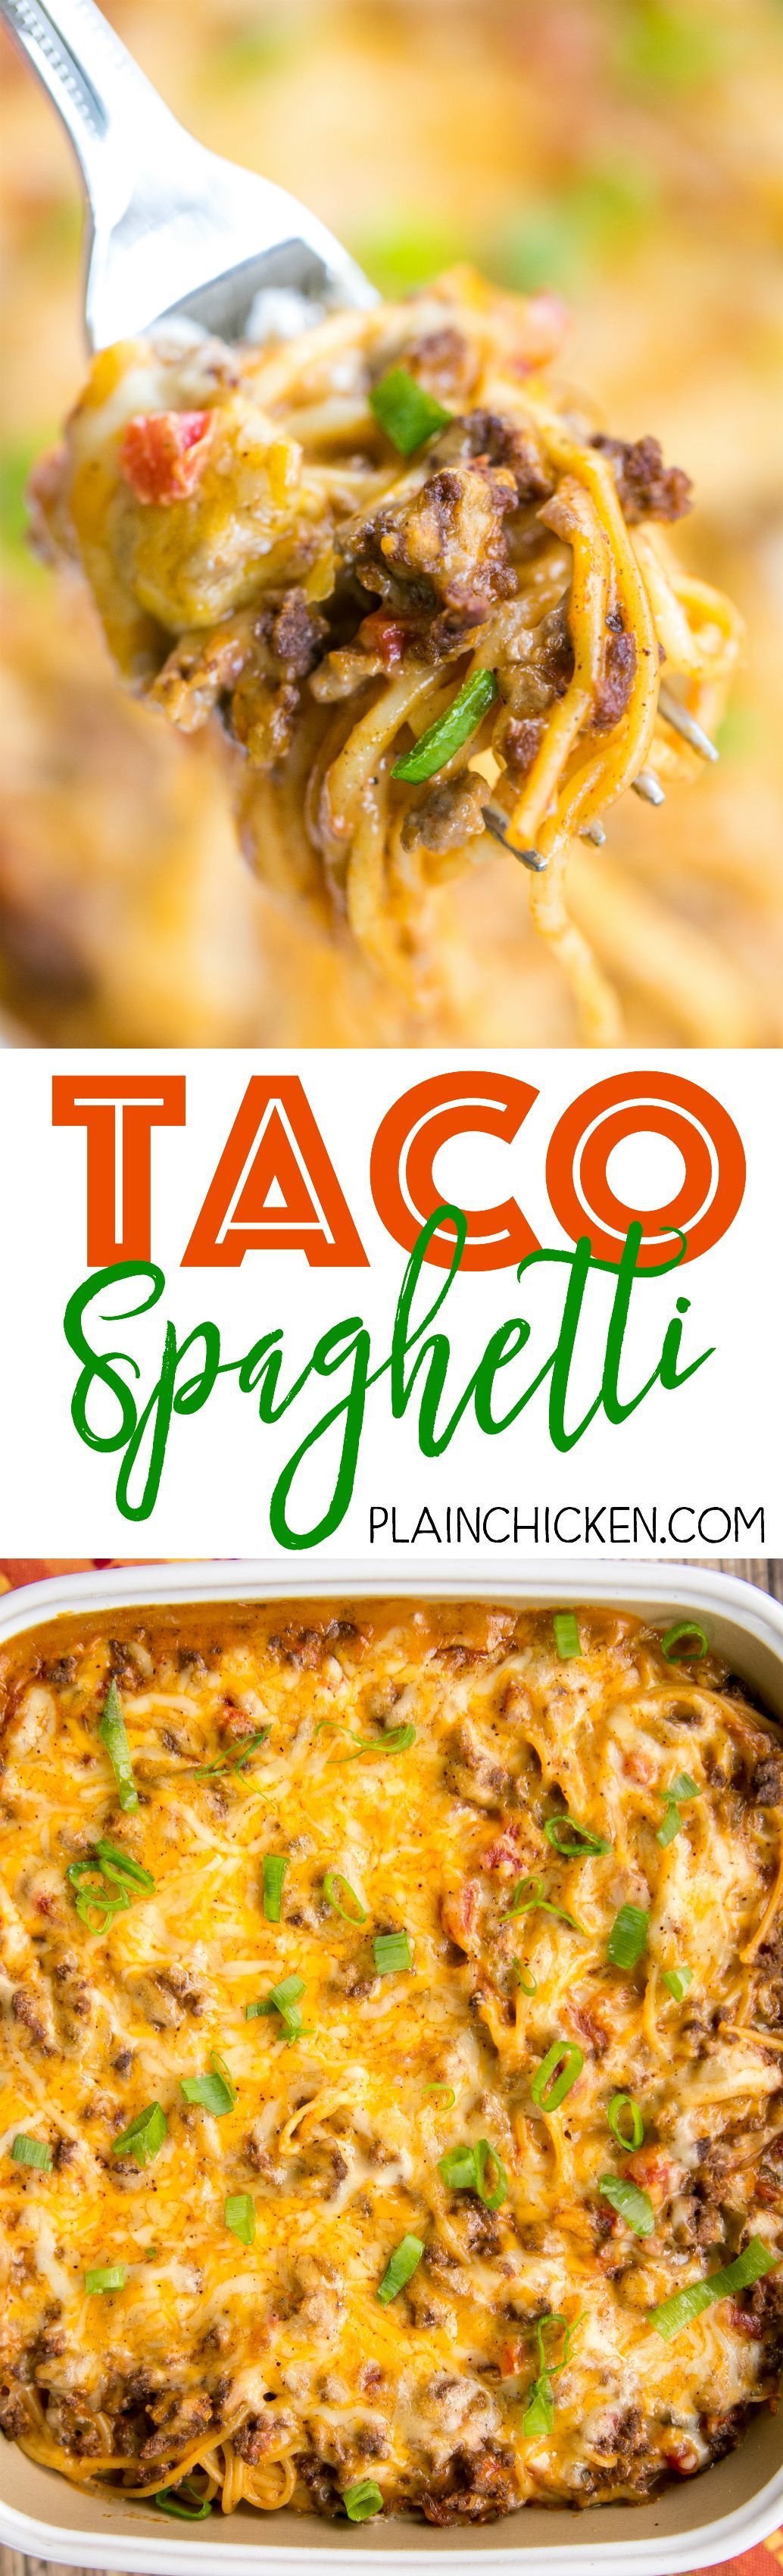 Taco Spaghetti – THE BEST! We ate this three days in a row! Ready in 30 minutes!! Taco meat, velveeta, diced tomatoes with green